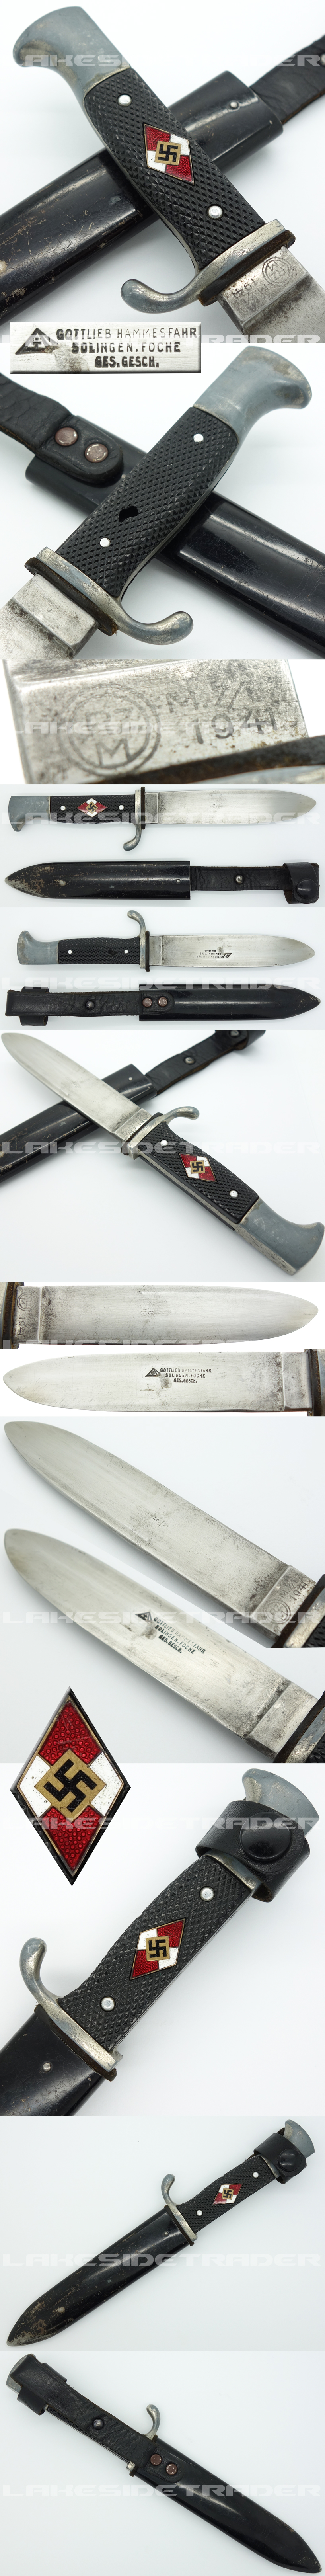 Transitional Hitler Youth Knife by Gottlieb Hammesfahr 1941